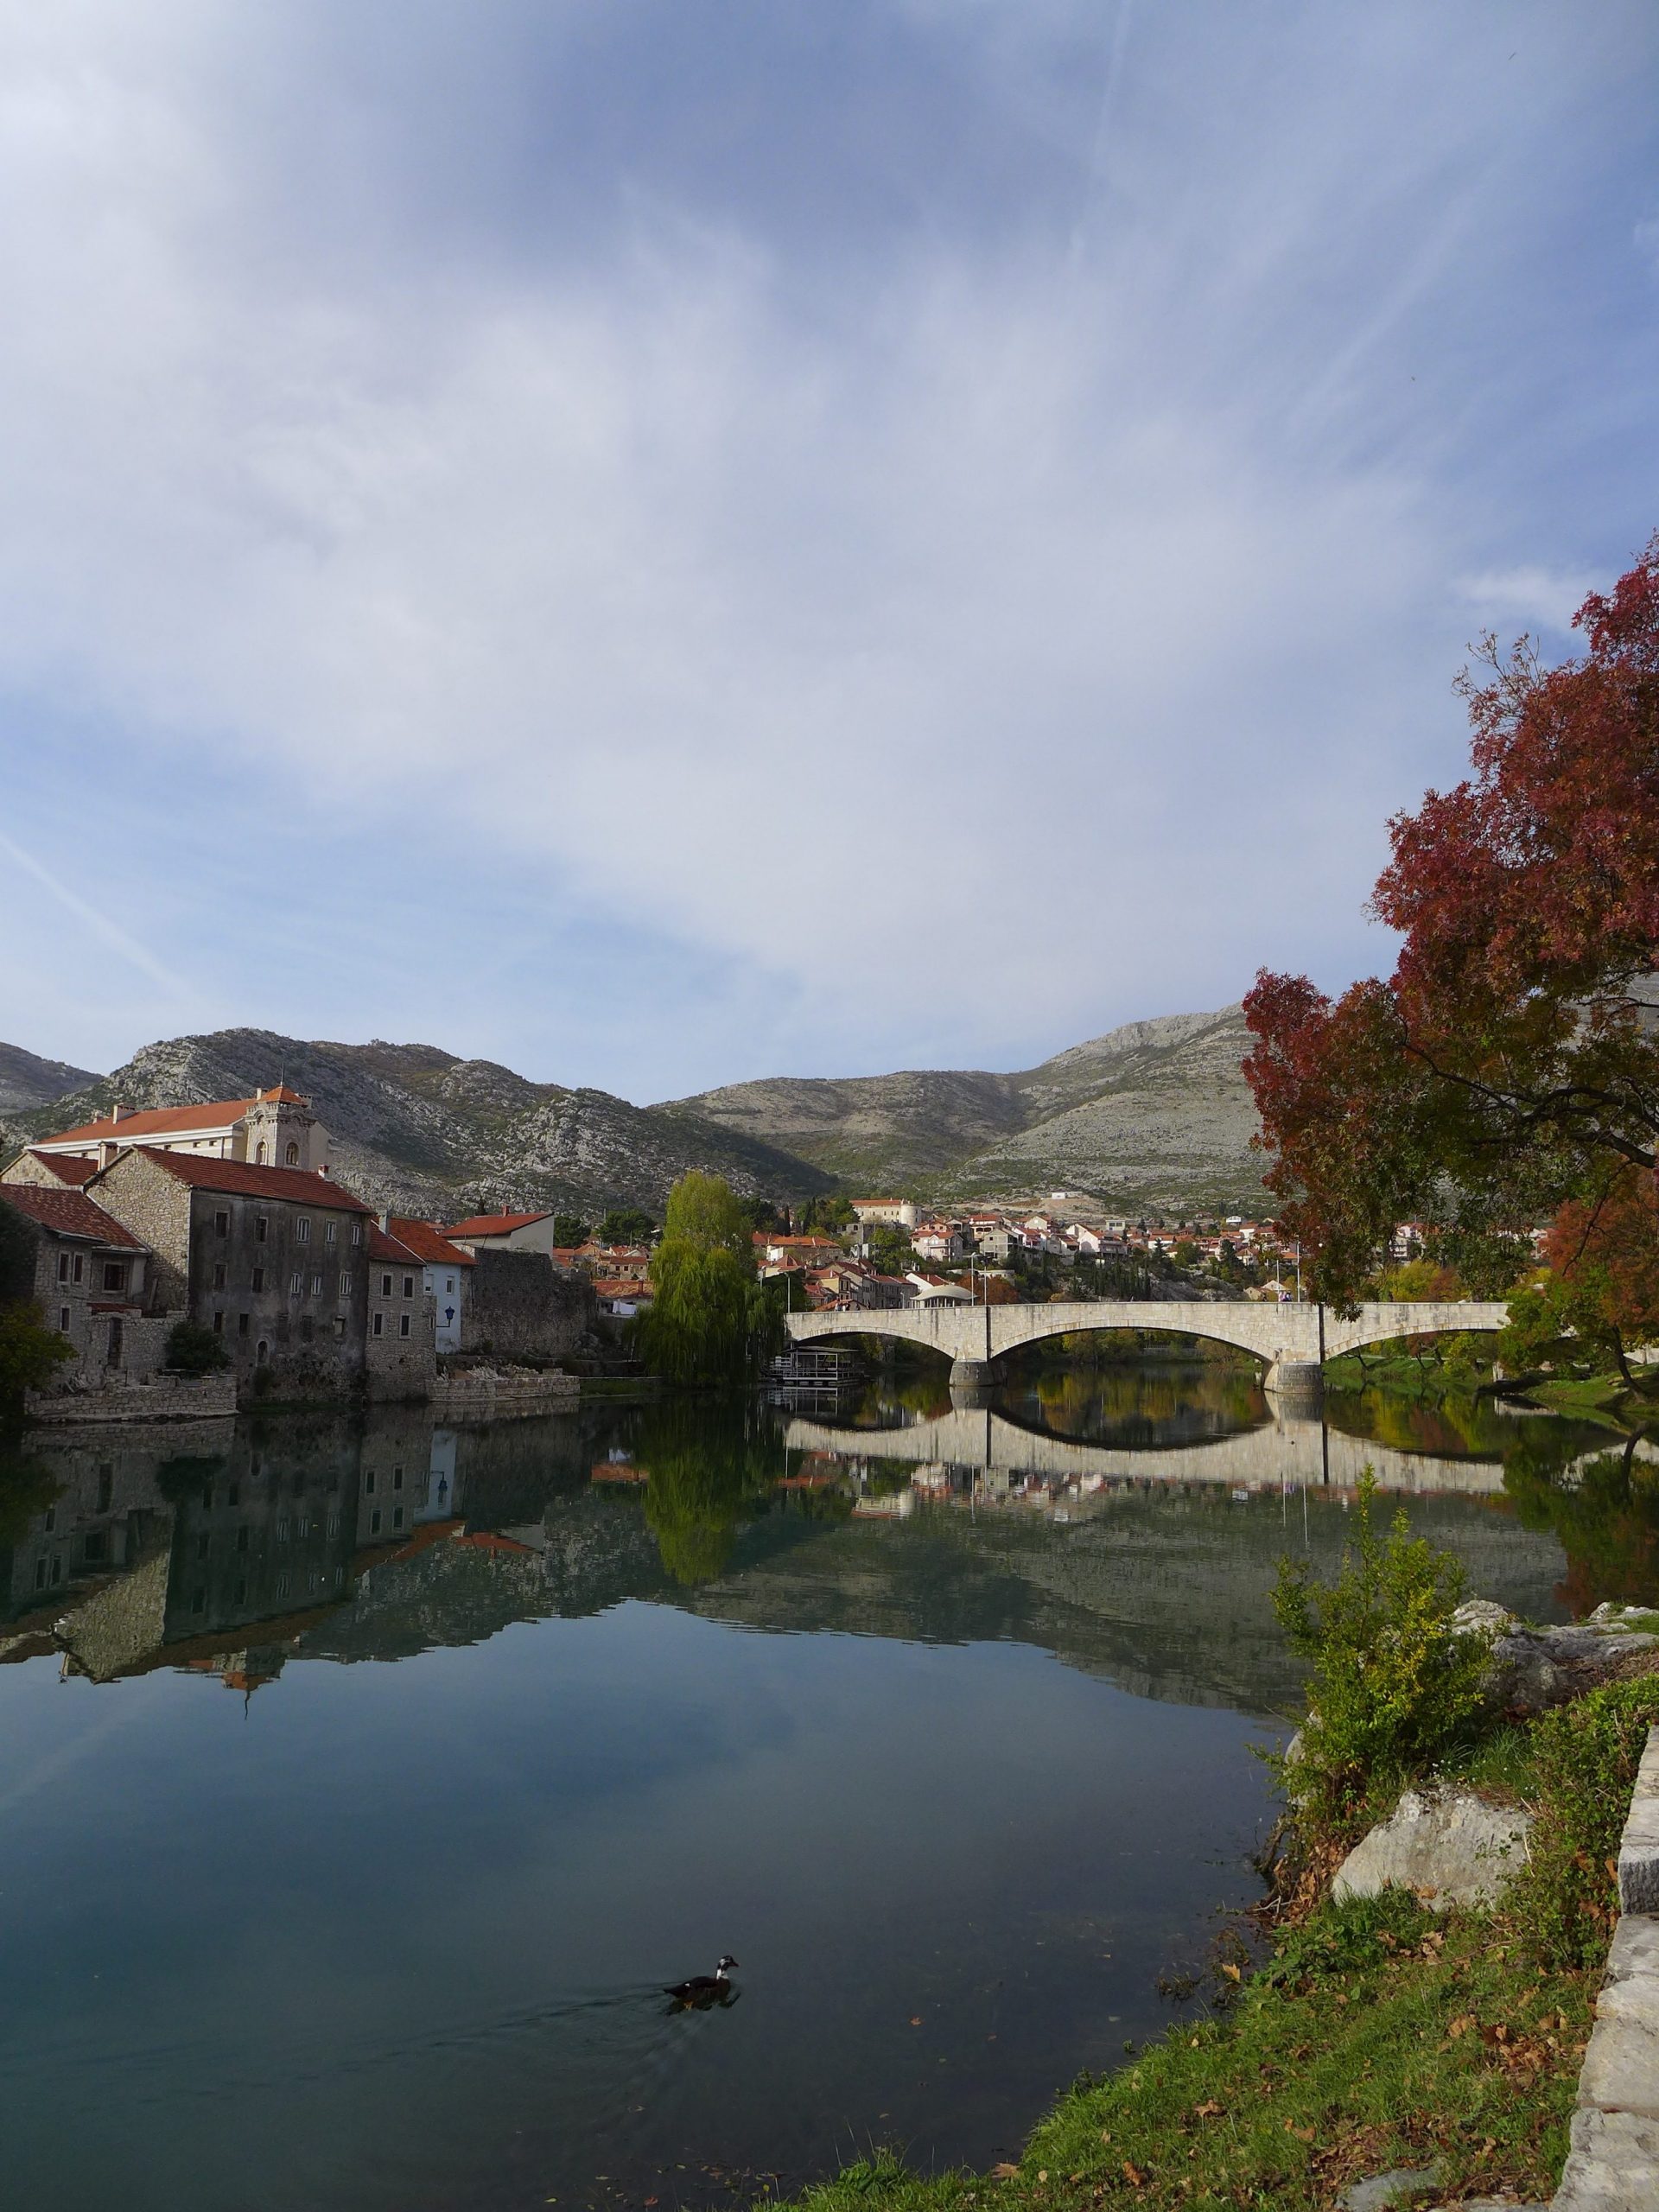 Trebinje Travel Guide: What to do and where to eat ⋆ LBSB World